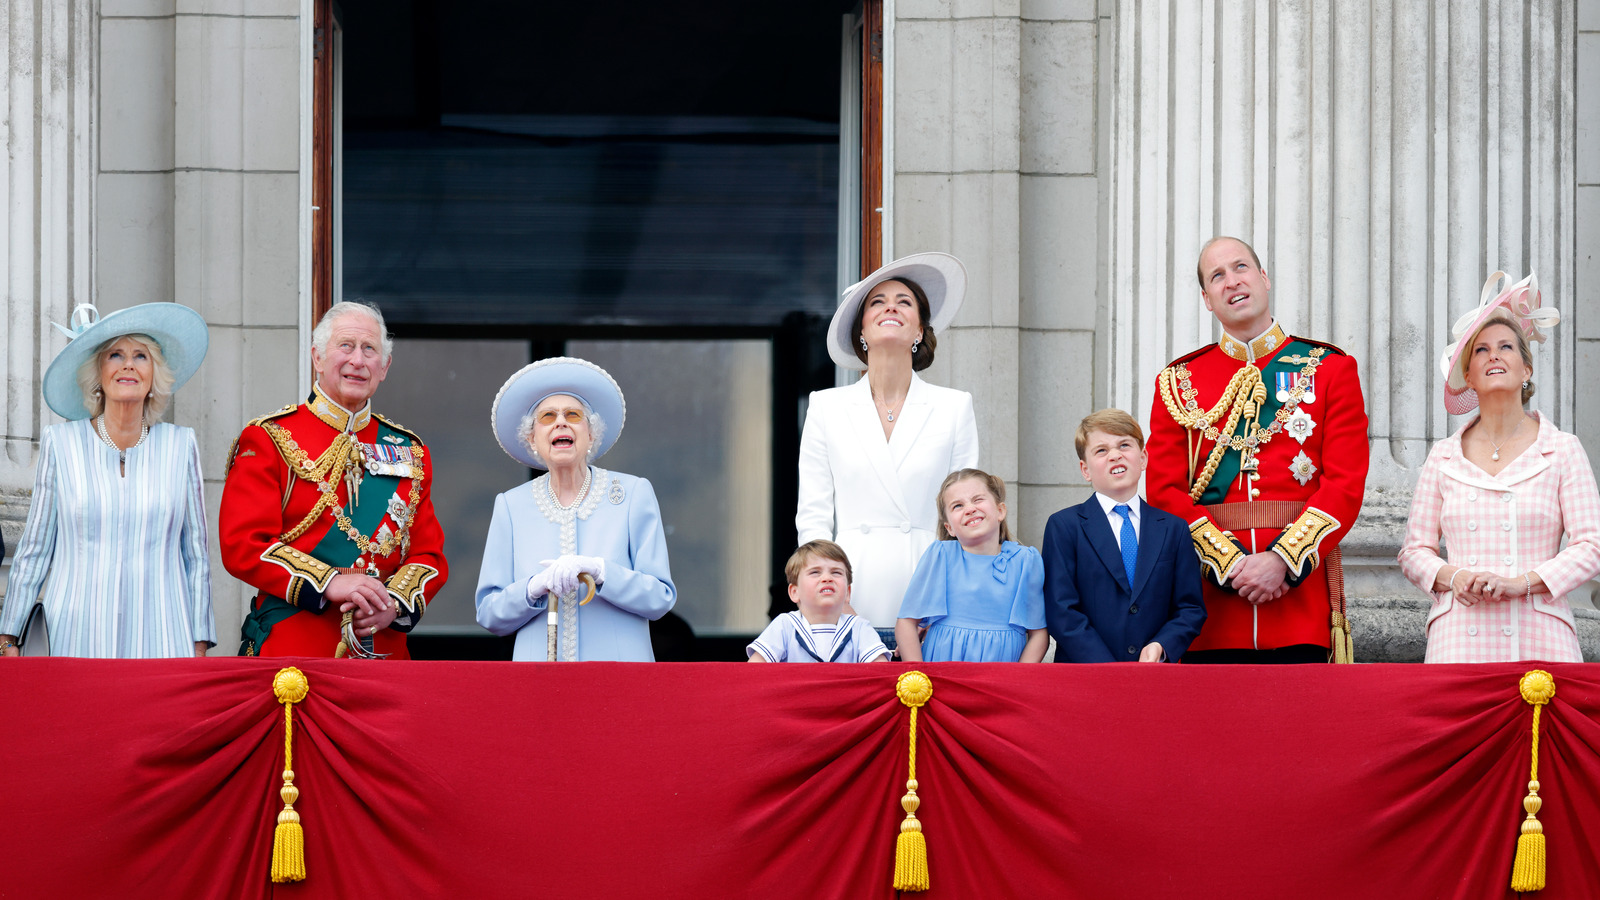 Each Royal's First Trooping The Colour Appearance 247 News Around The